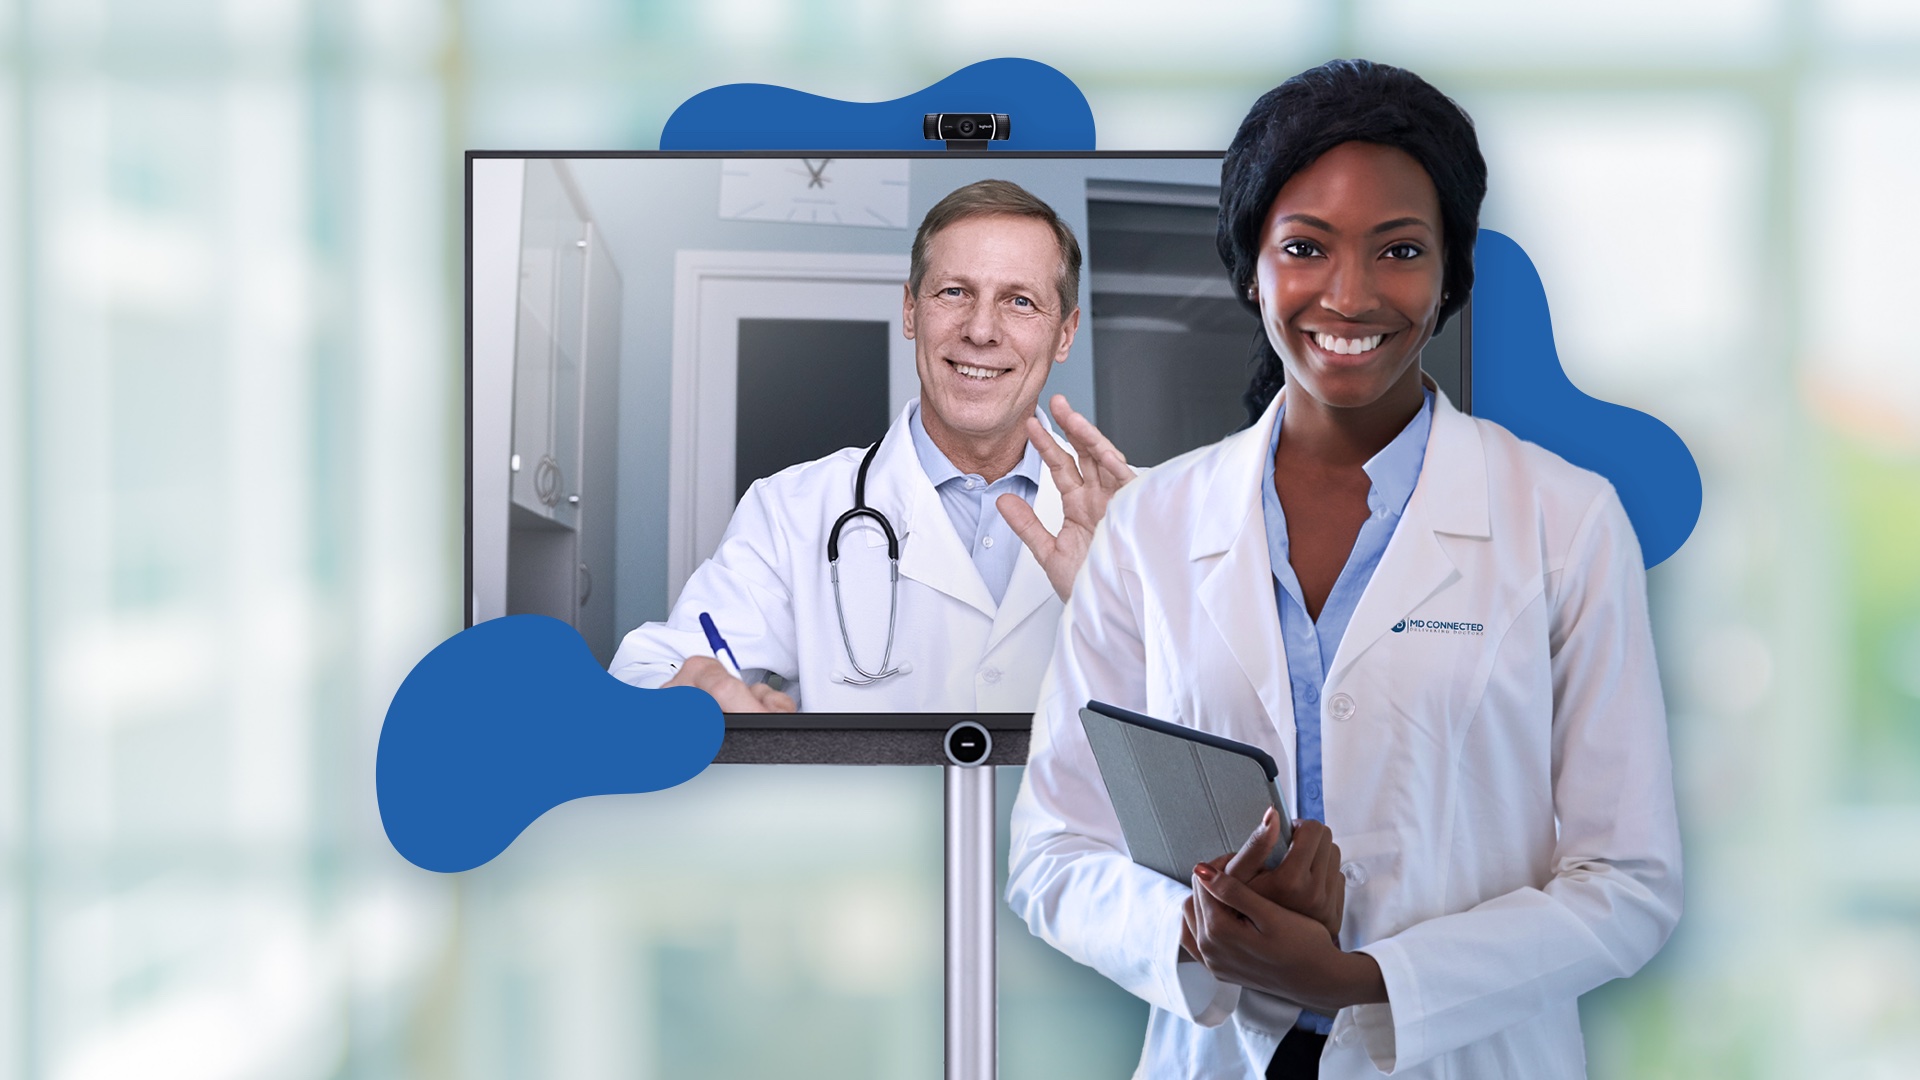 WHAT IS TELEMEDICINE?